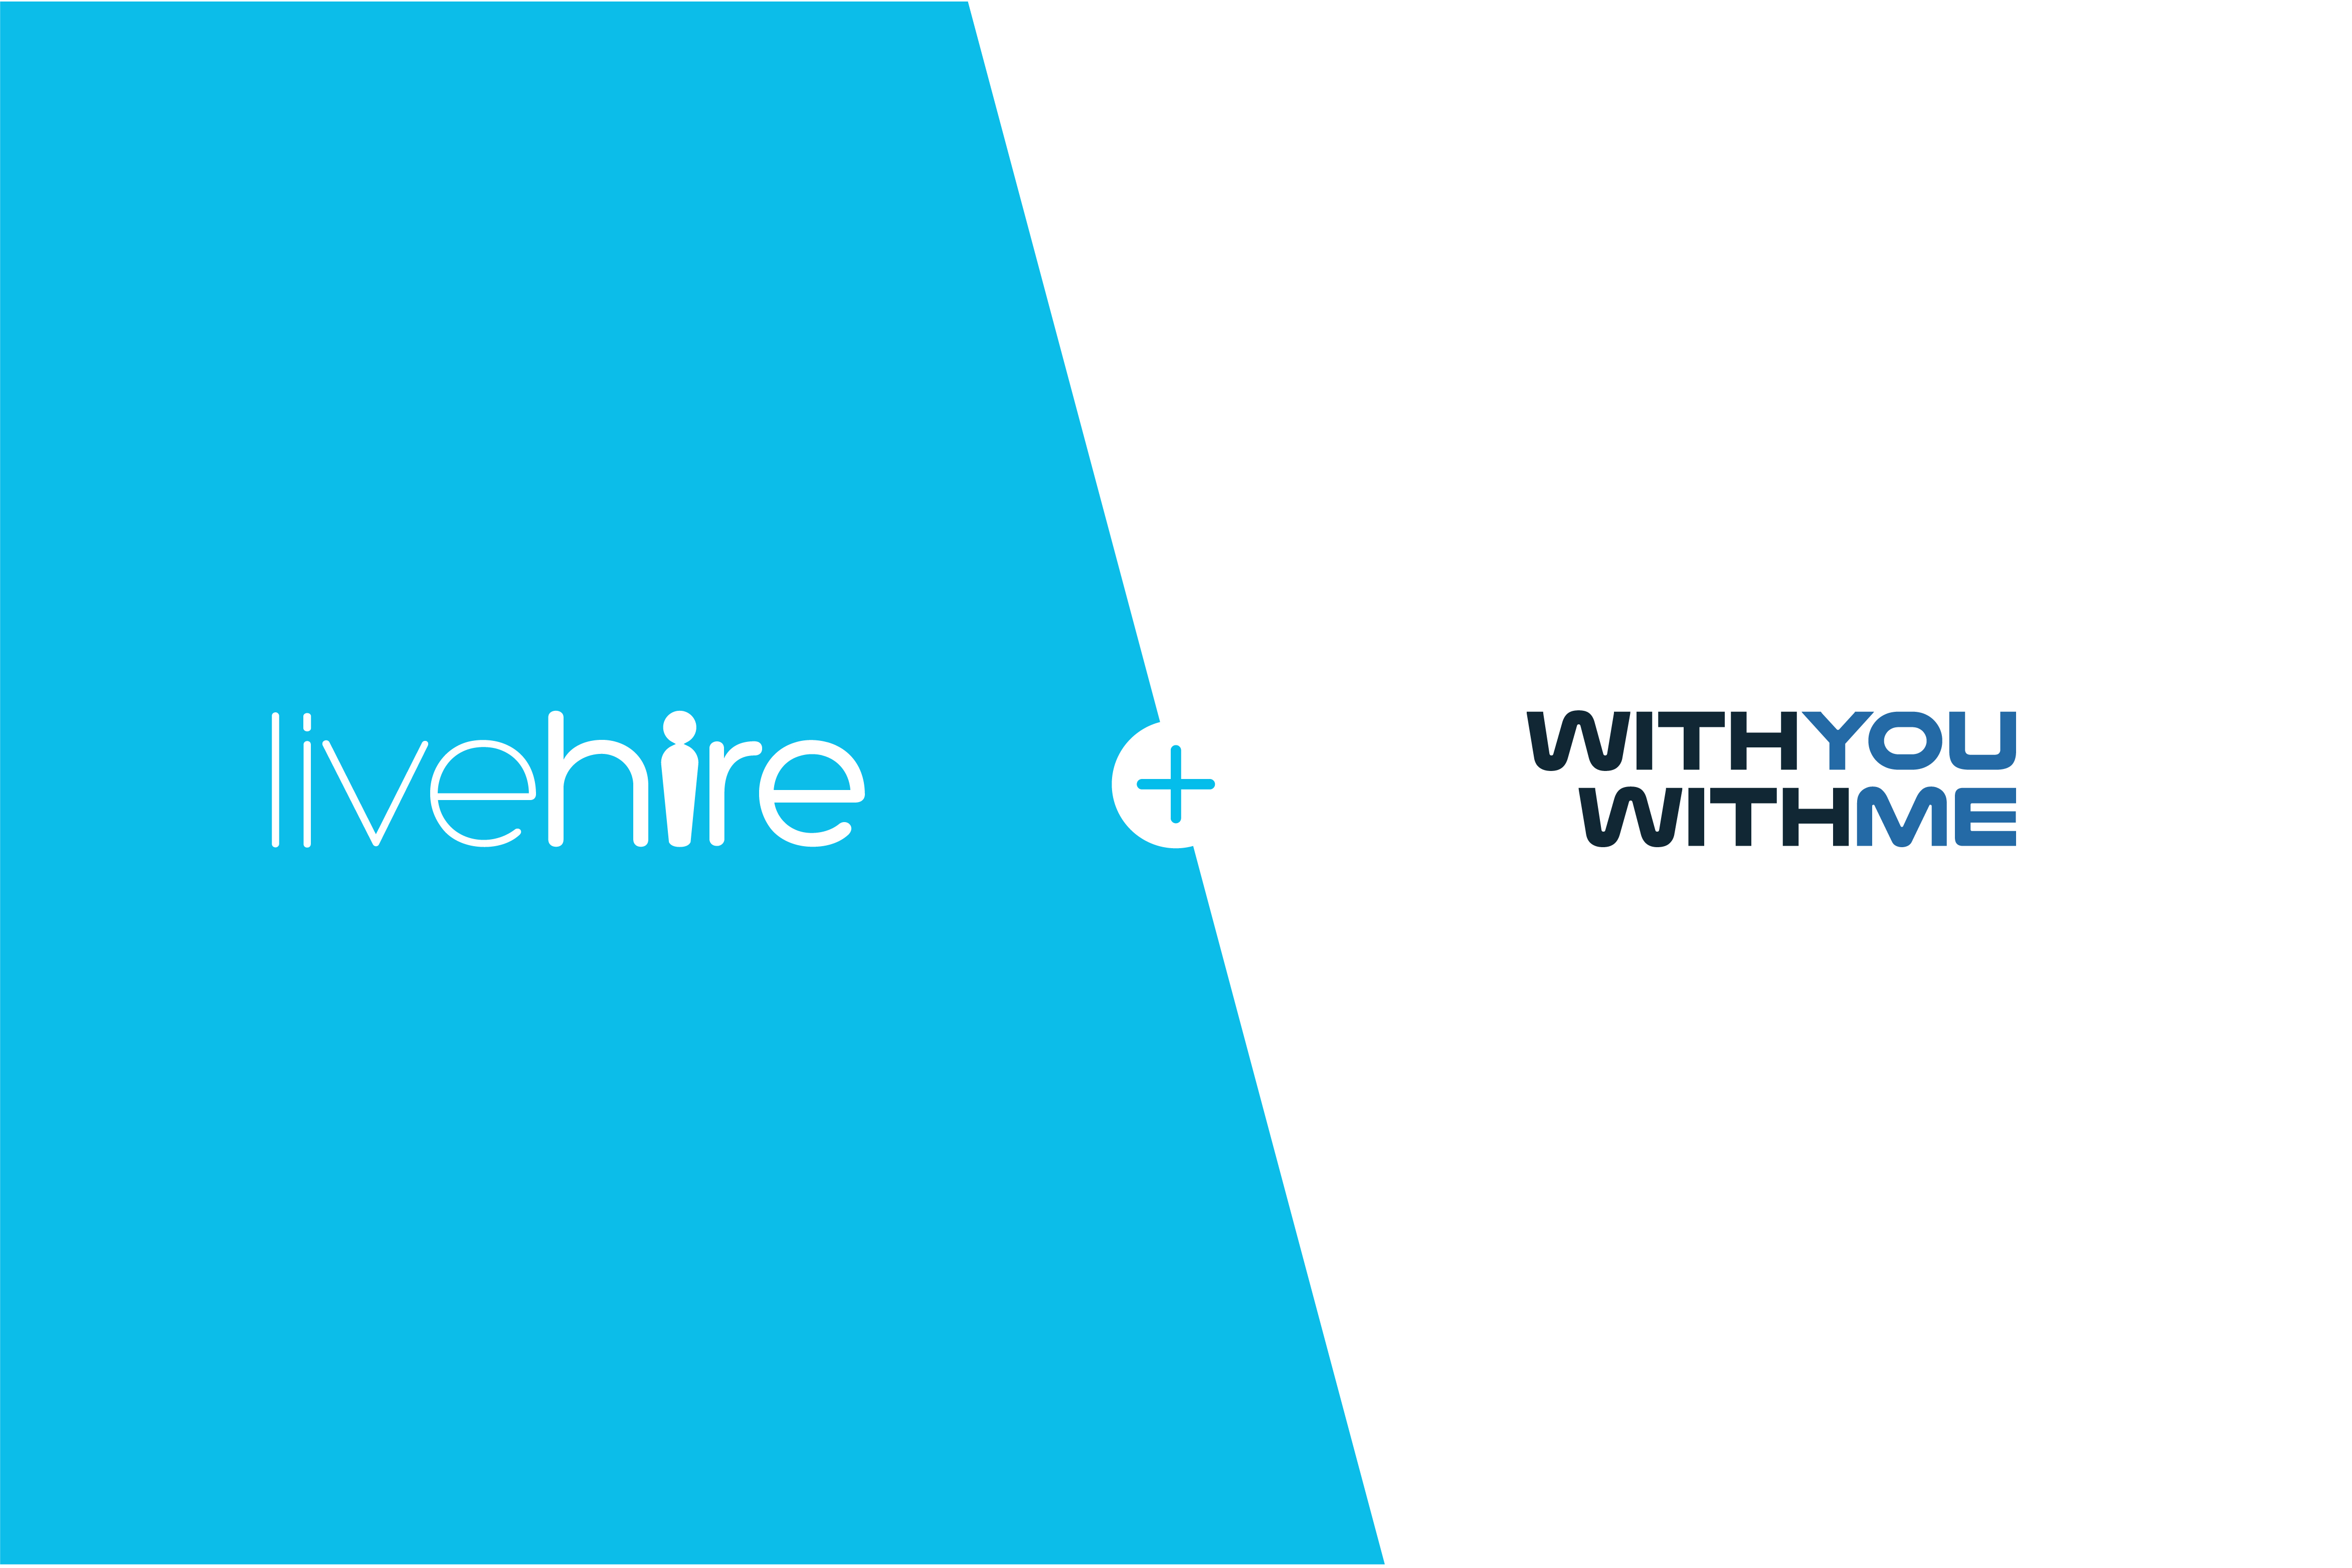 LiveHire partners with WithYouWithMe